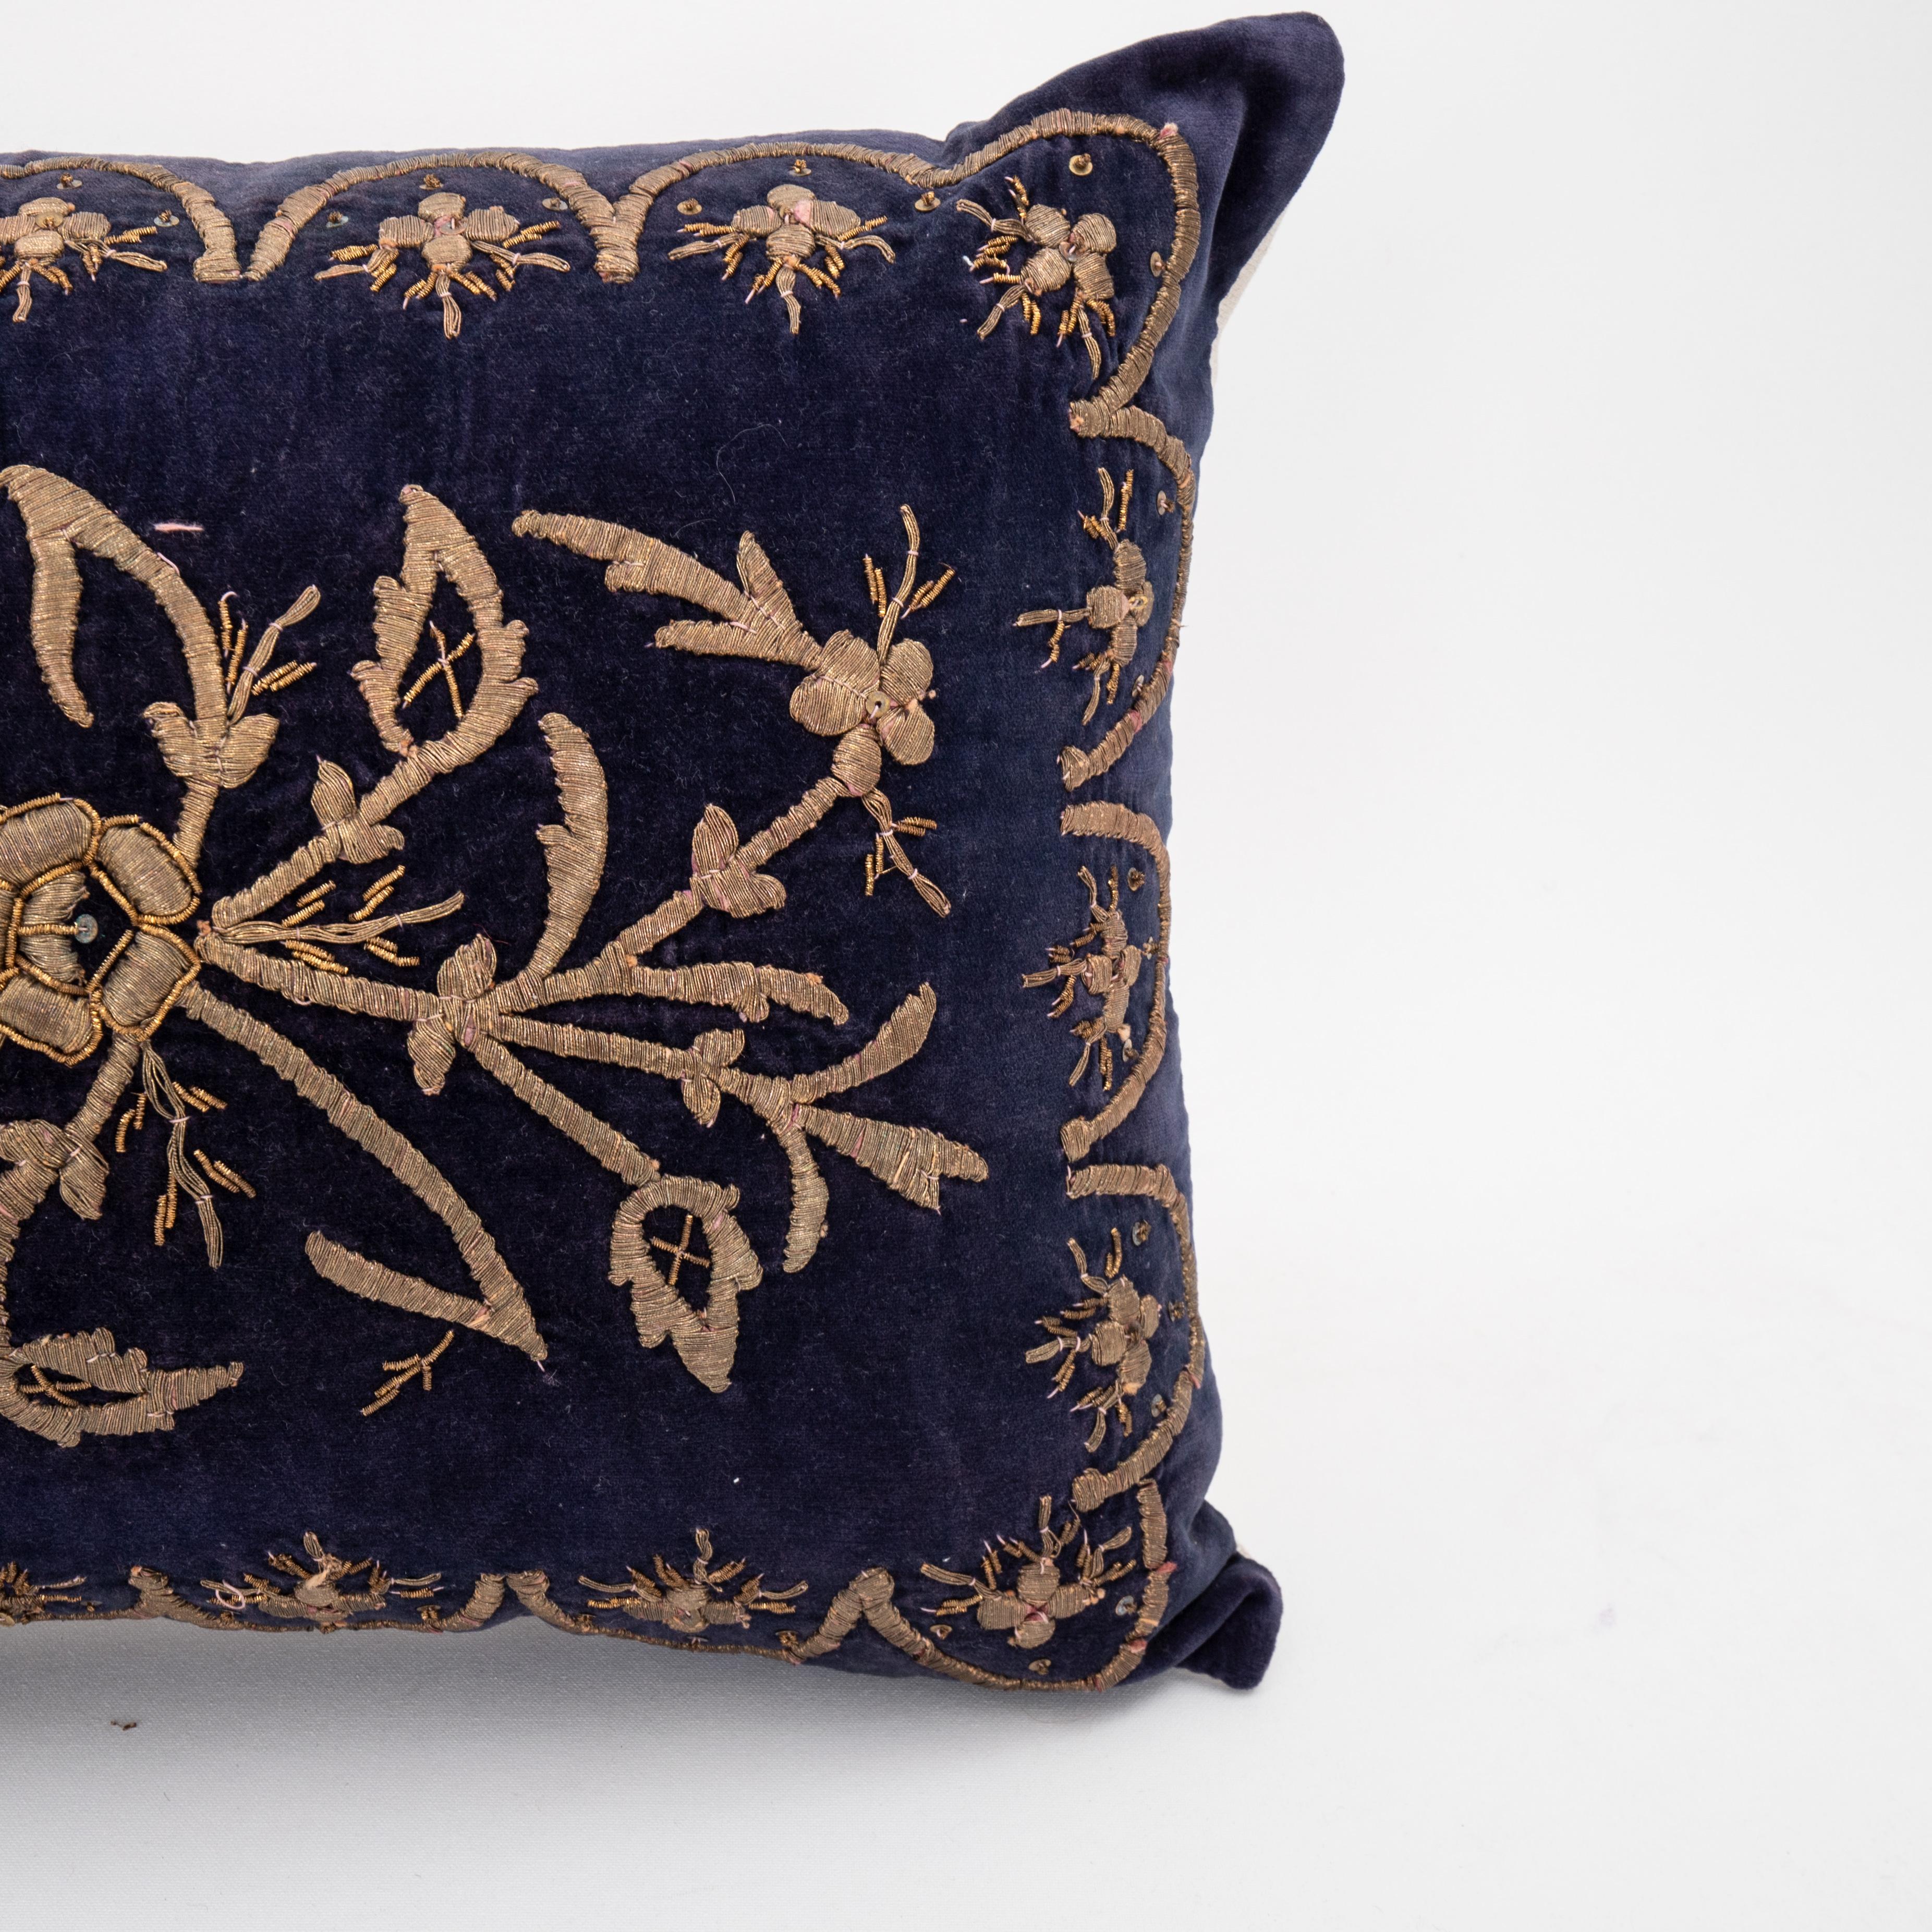 Ottoman Pillow Cover in Sarma Technique, late 19th / Early 20th C. In Fair Condition For Sale In Istanbul, TR